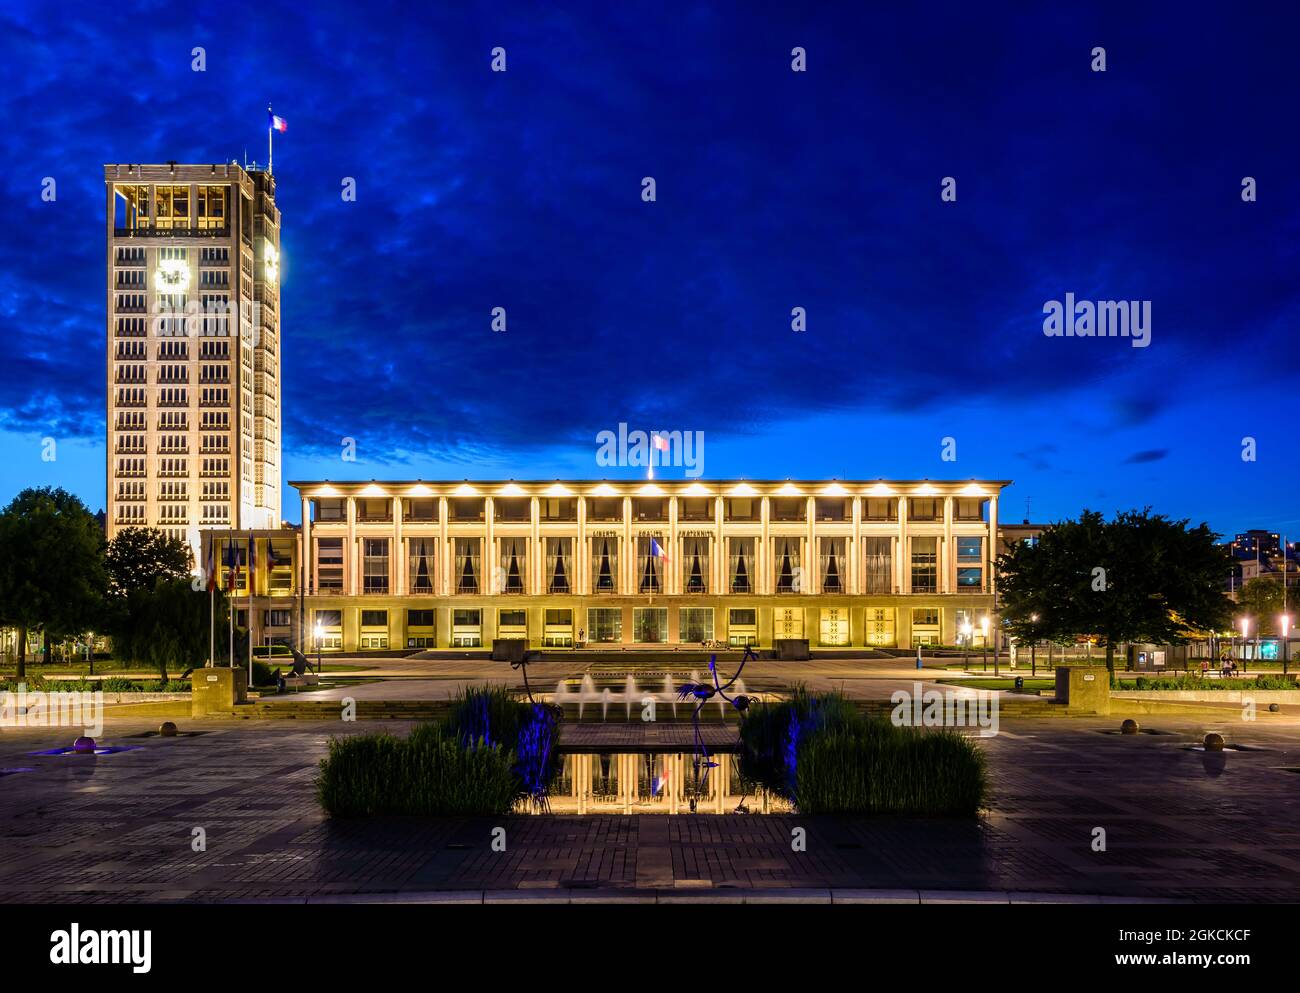 Facade and tower of the city hall of Le Havre, France, by night. Stock Photo